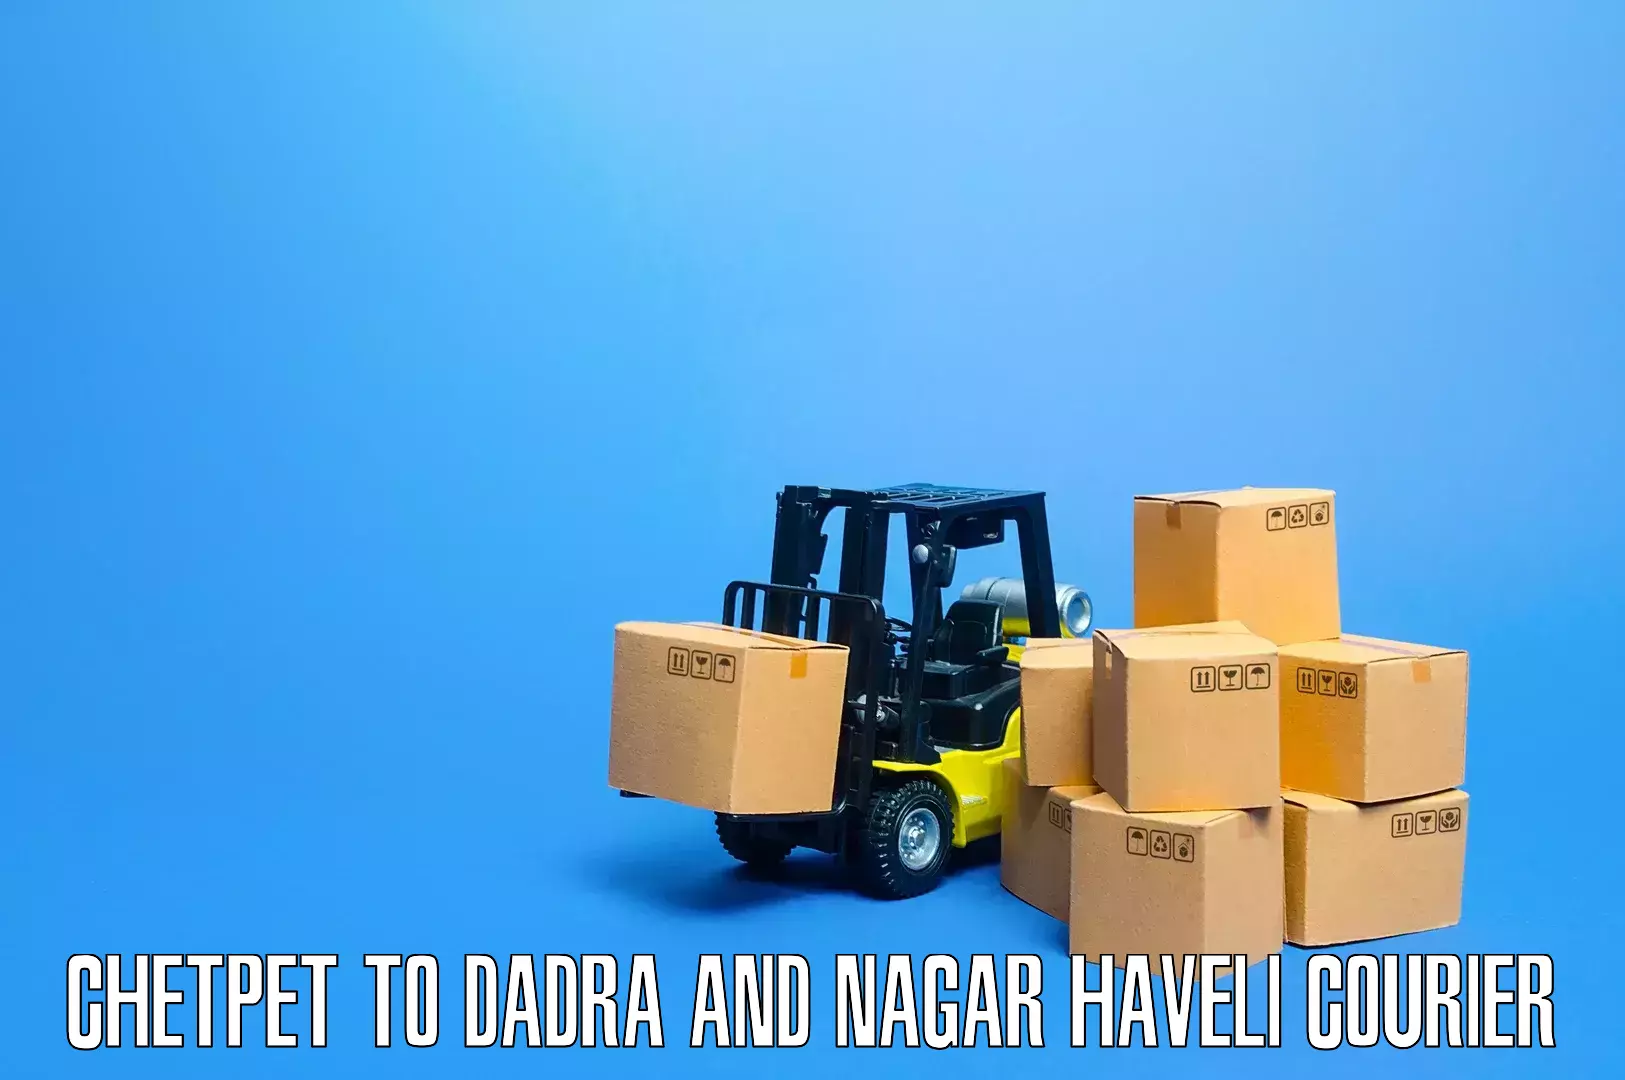 Furniture delivery service Chetpet to Dadra and Nagar Haveli